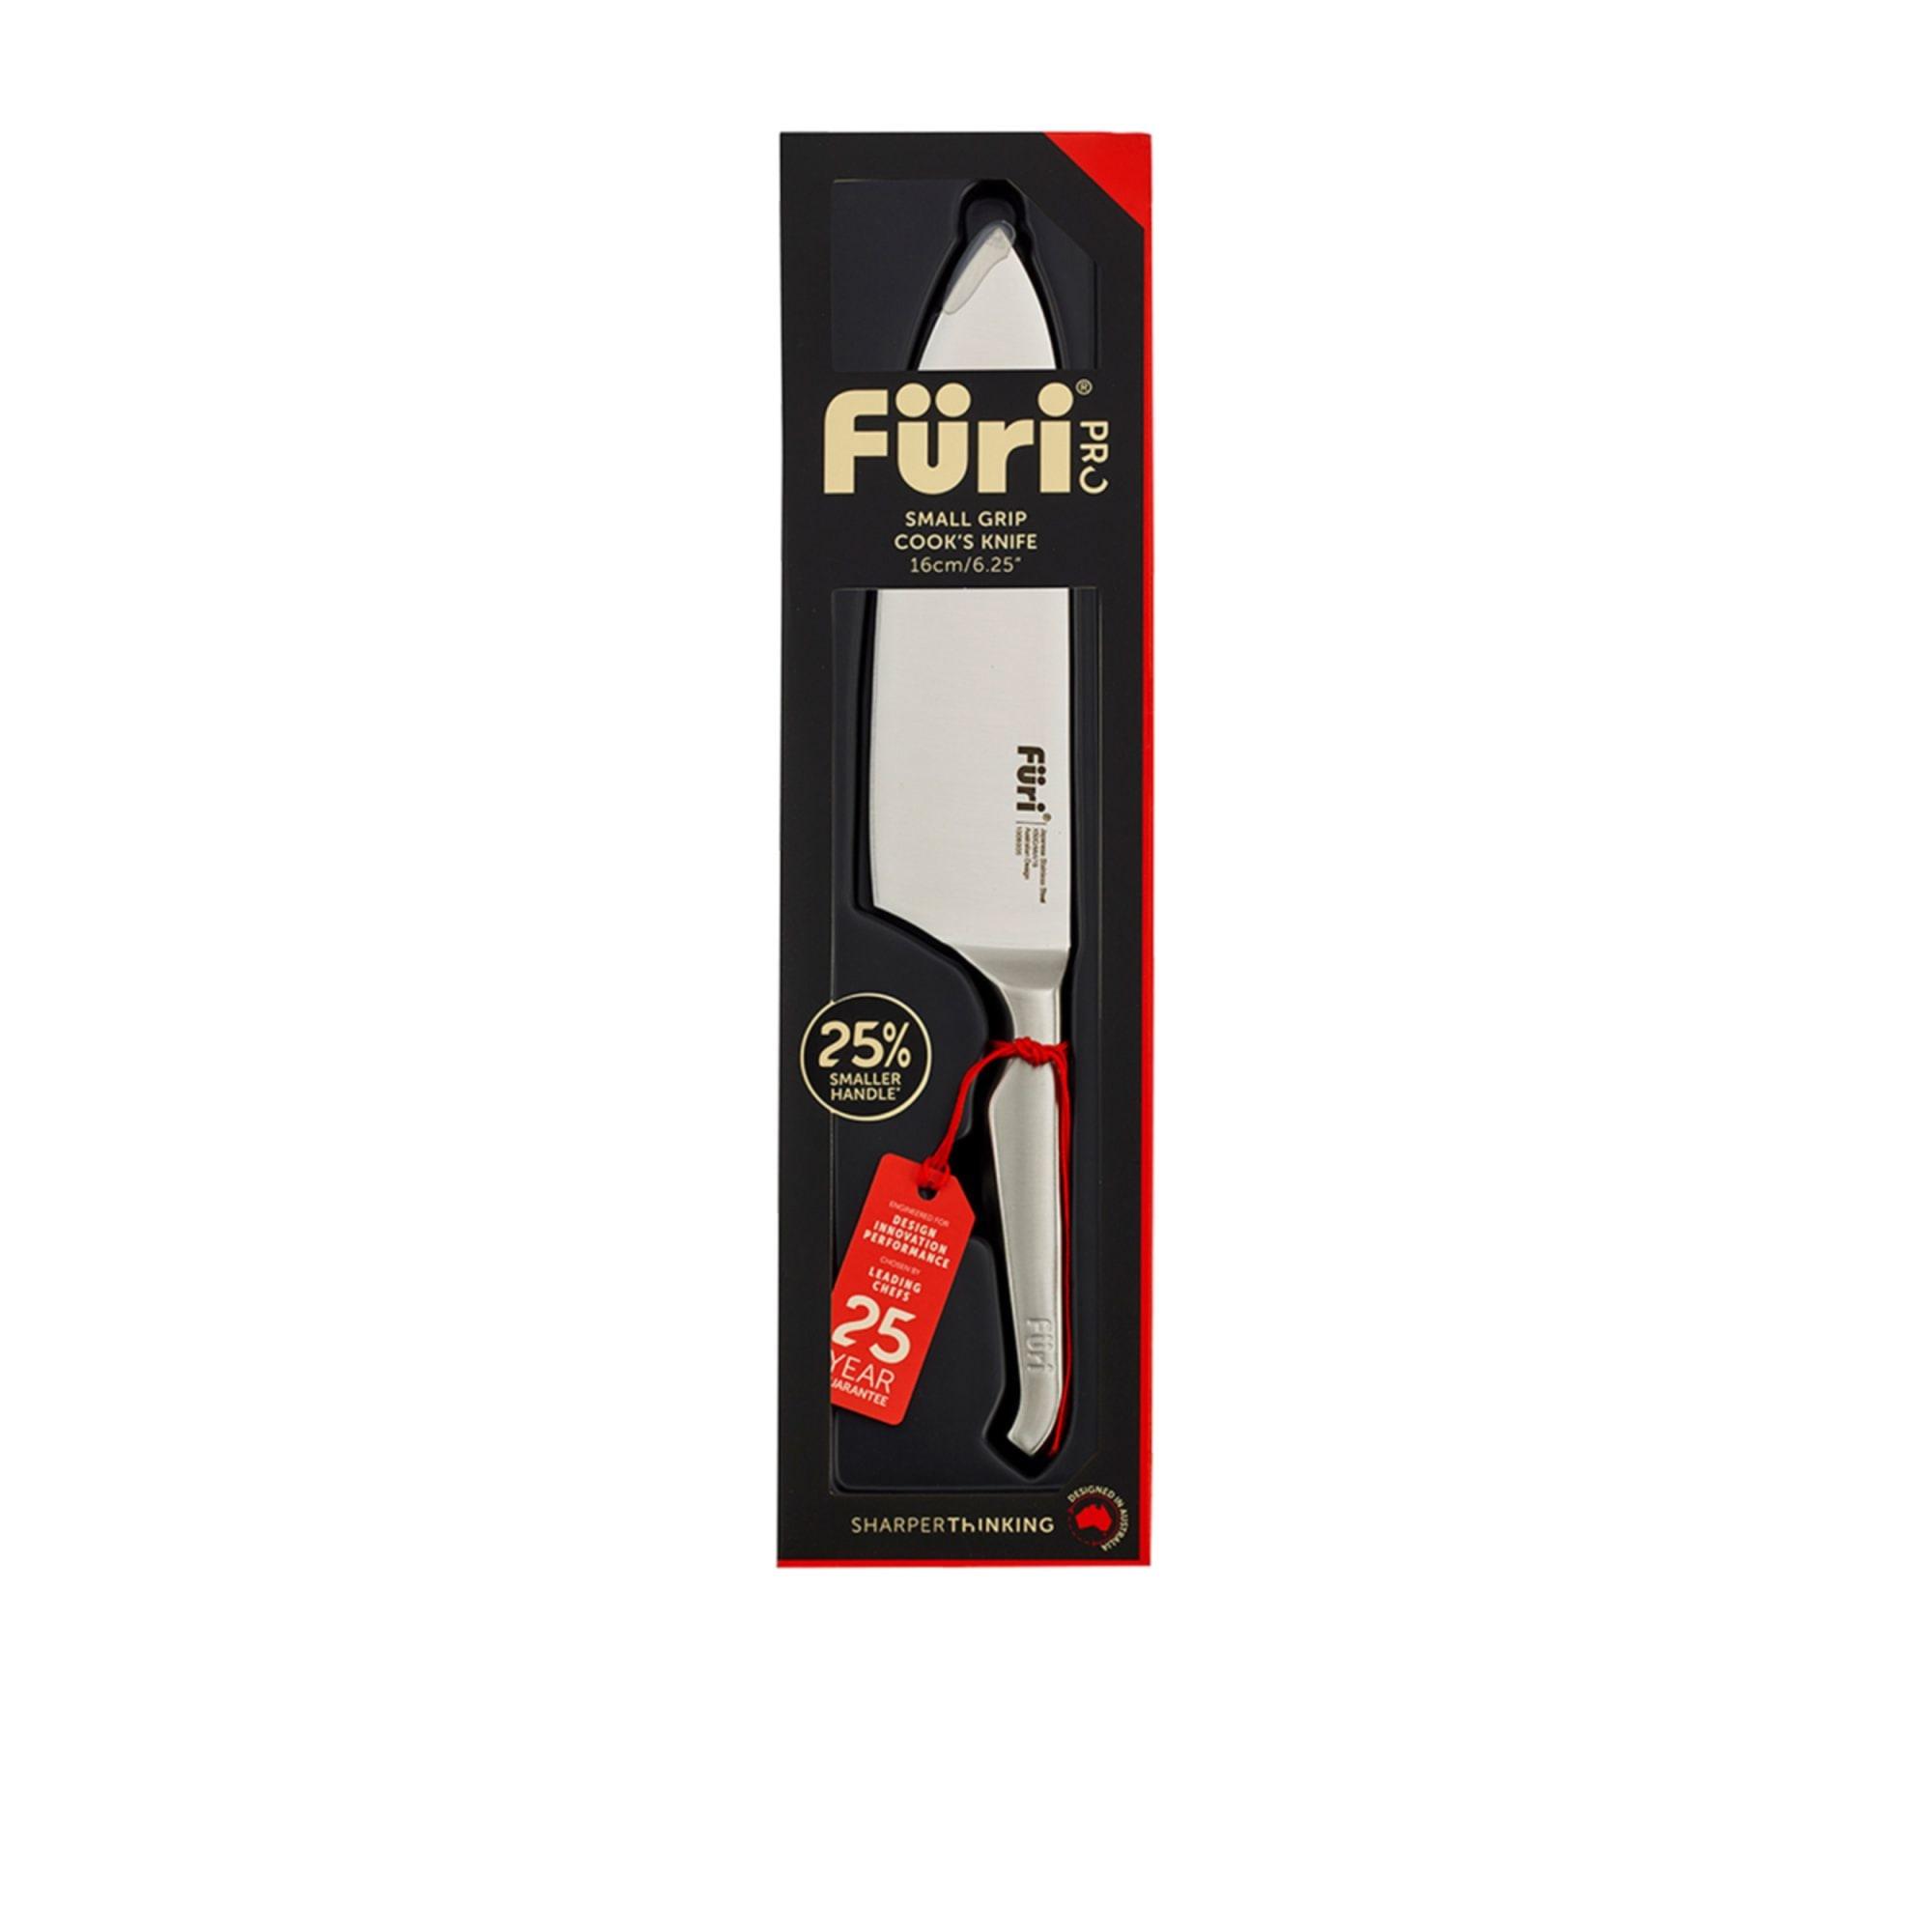 Furi Pro Small Grip Cook's Knife 16cm Image 3